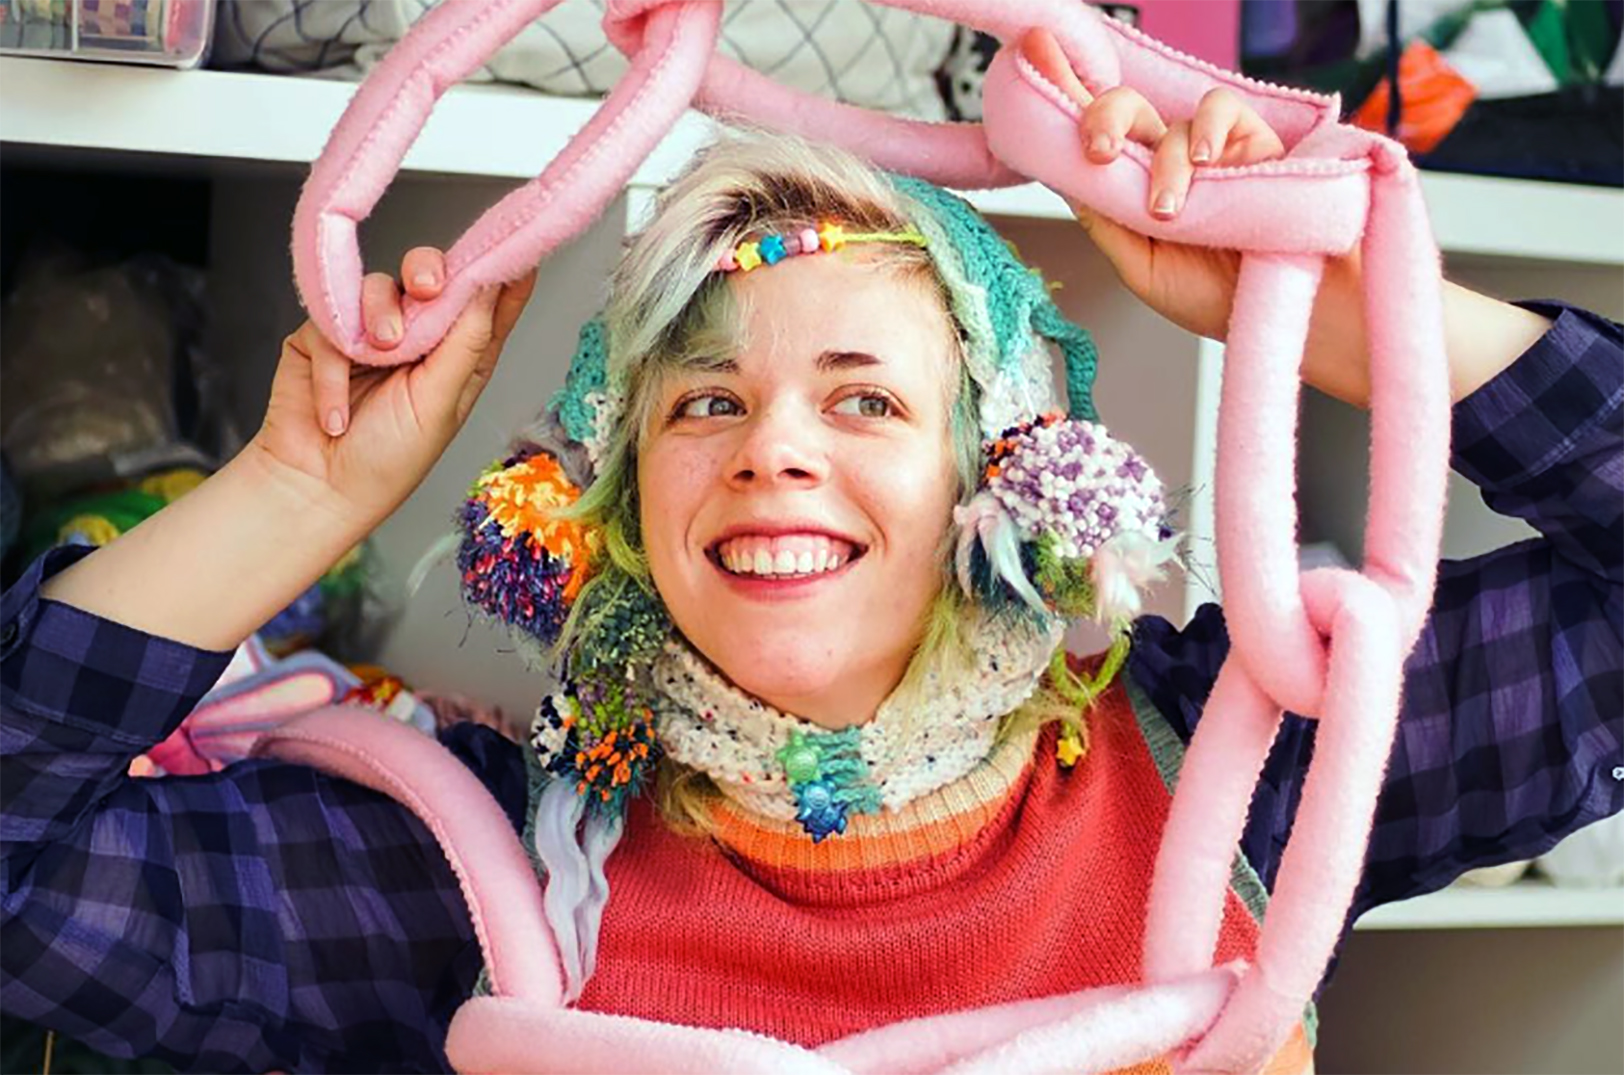 Their joyful art began with pom poms, but Bubble Gum Kurt’s upcycled expression won’t be boxed in